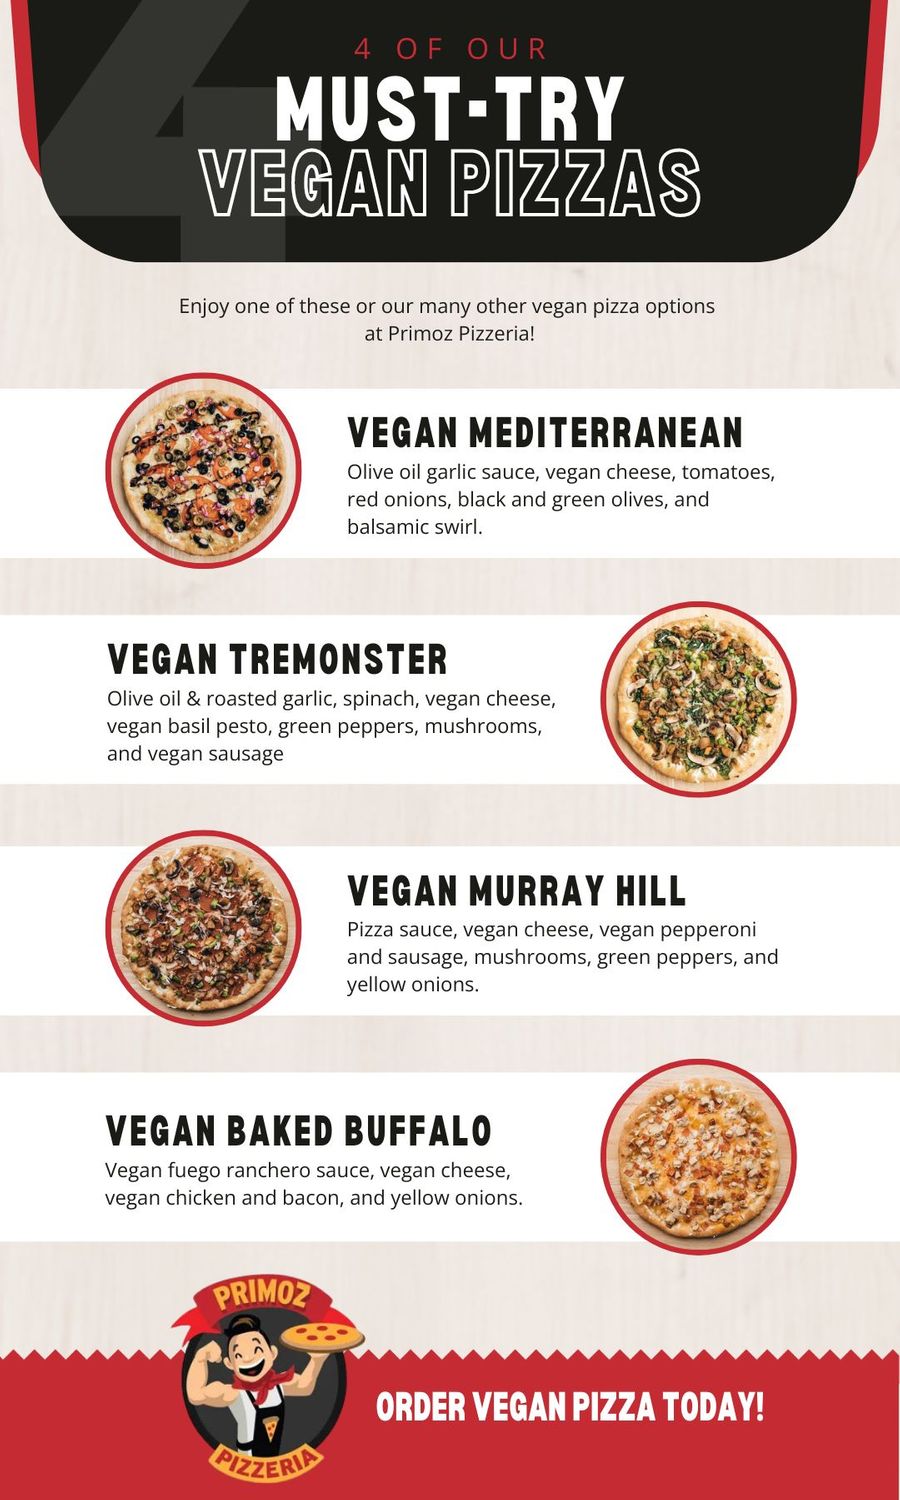 4 must try vegan pizzas infographic